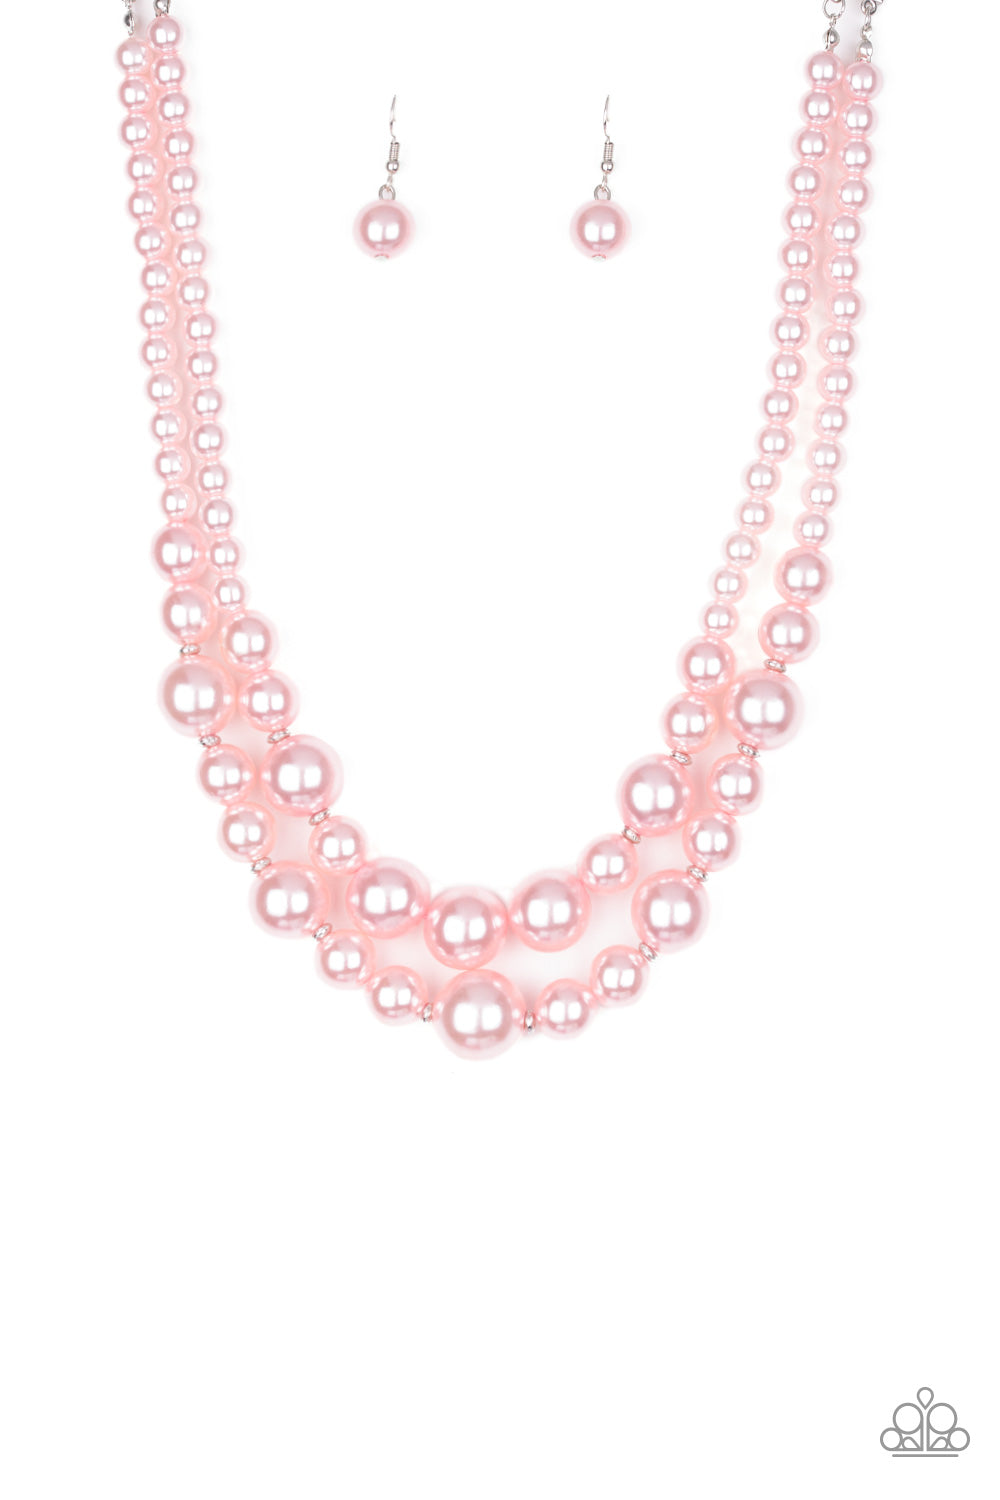 The More The Modest Pink Paparazzi Necklace Cashmere Pink Jewels - Cashmere Pink Jewels & Accessories, Cashmere Pink Jewels & Accessories - Paparazzi